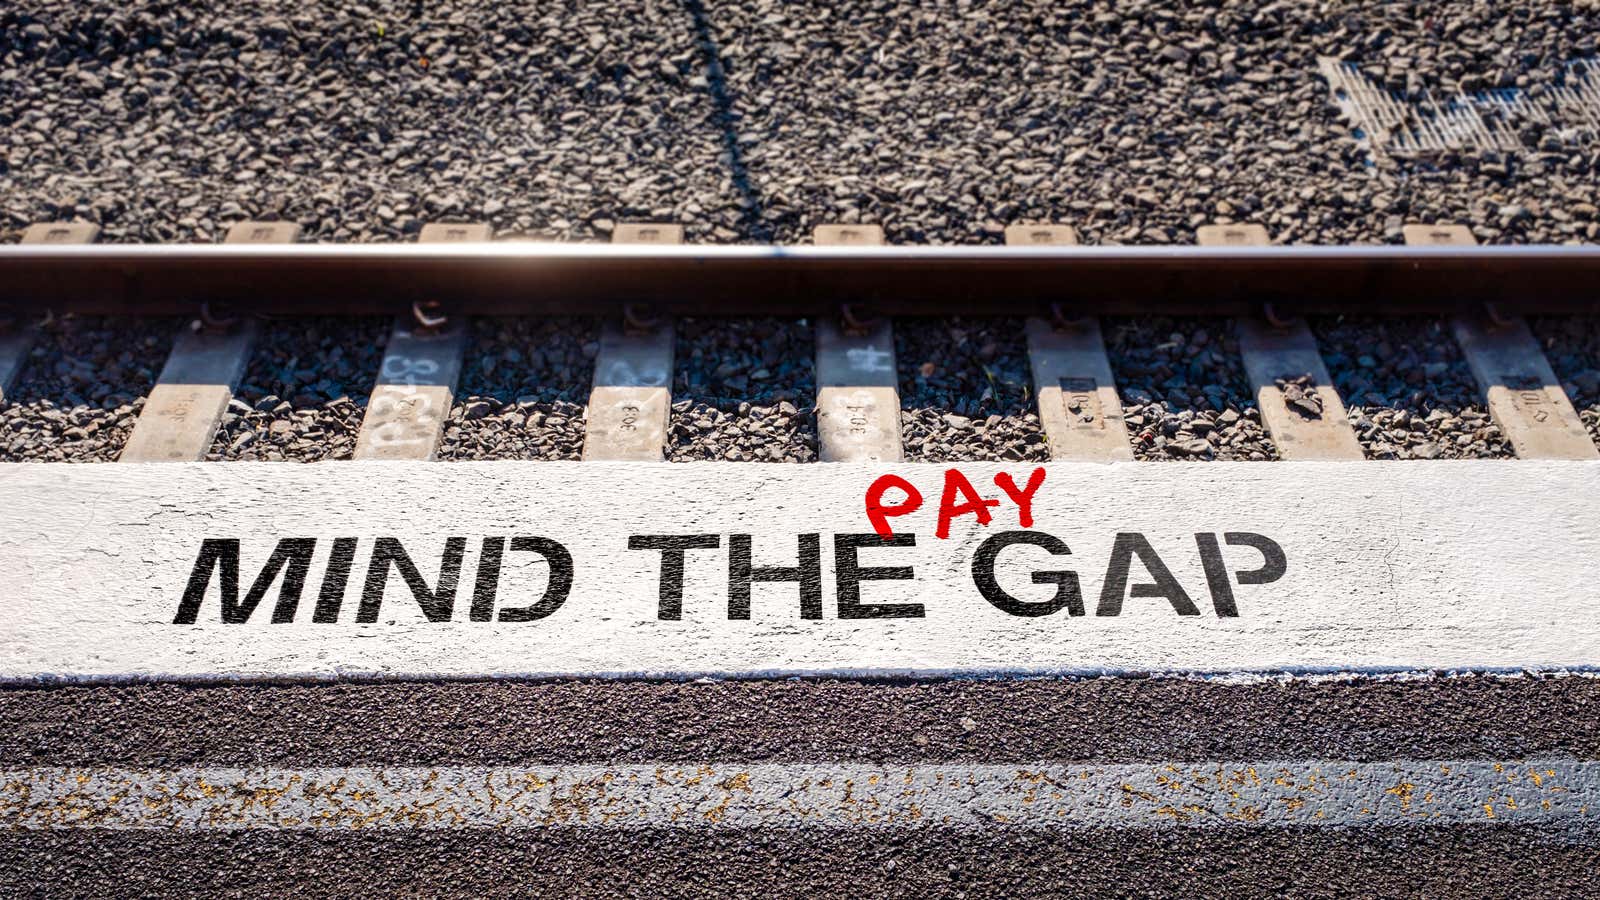 6 strategies to help HR and companies close the pay gap